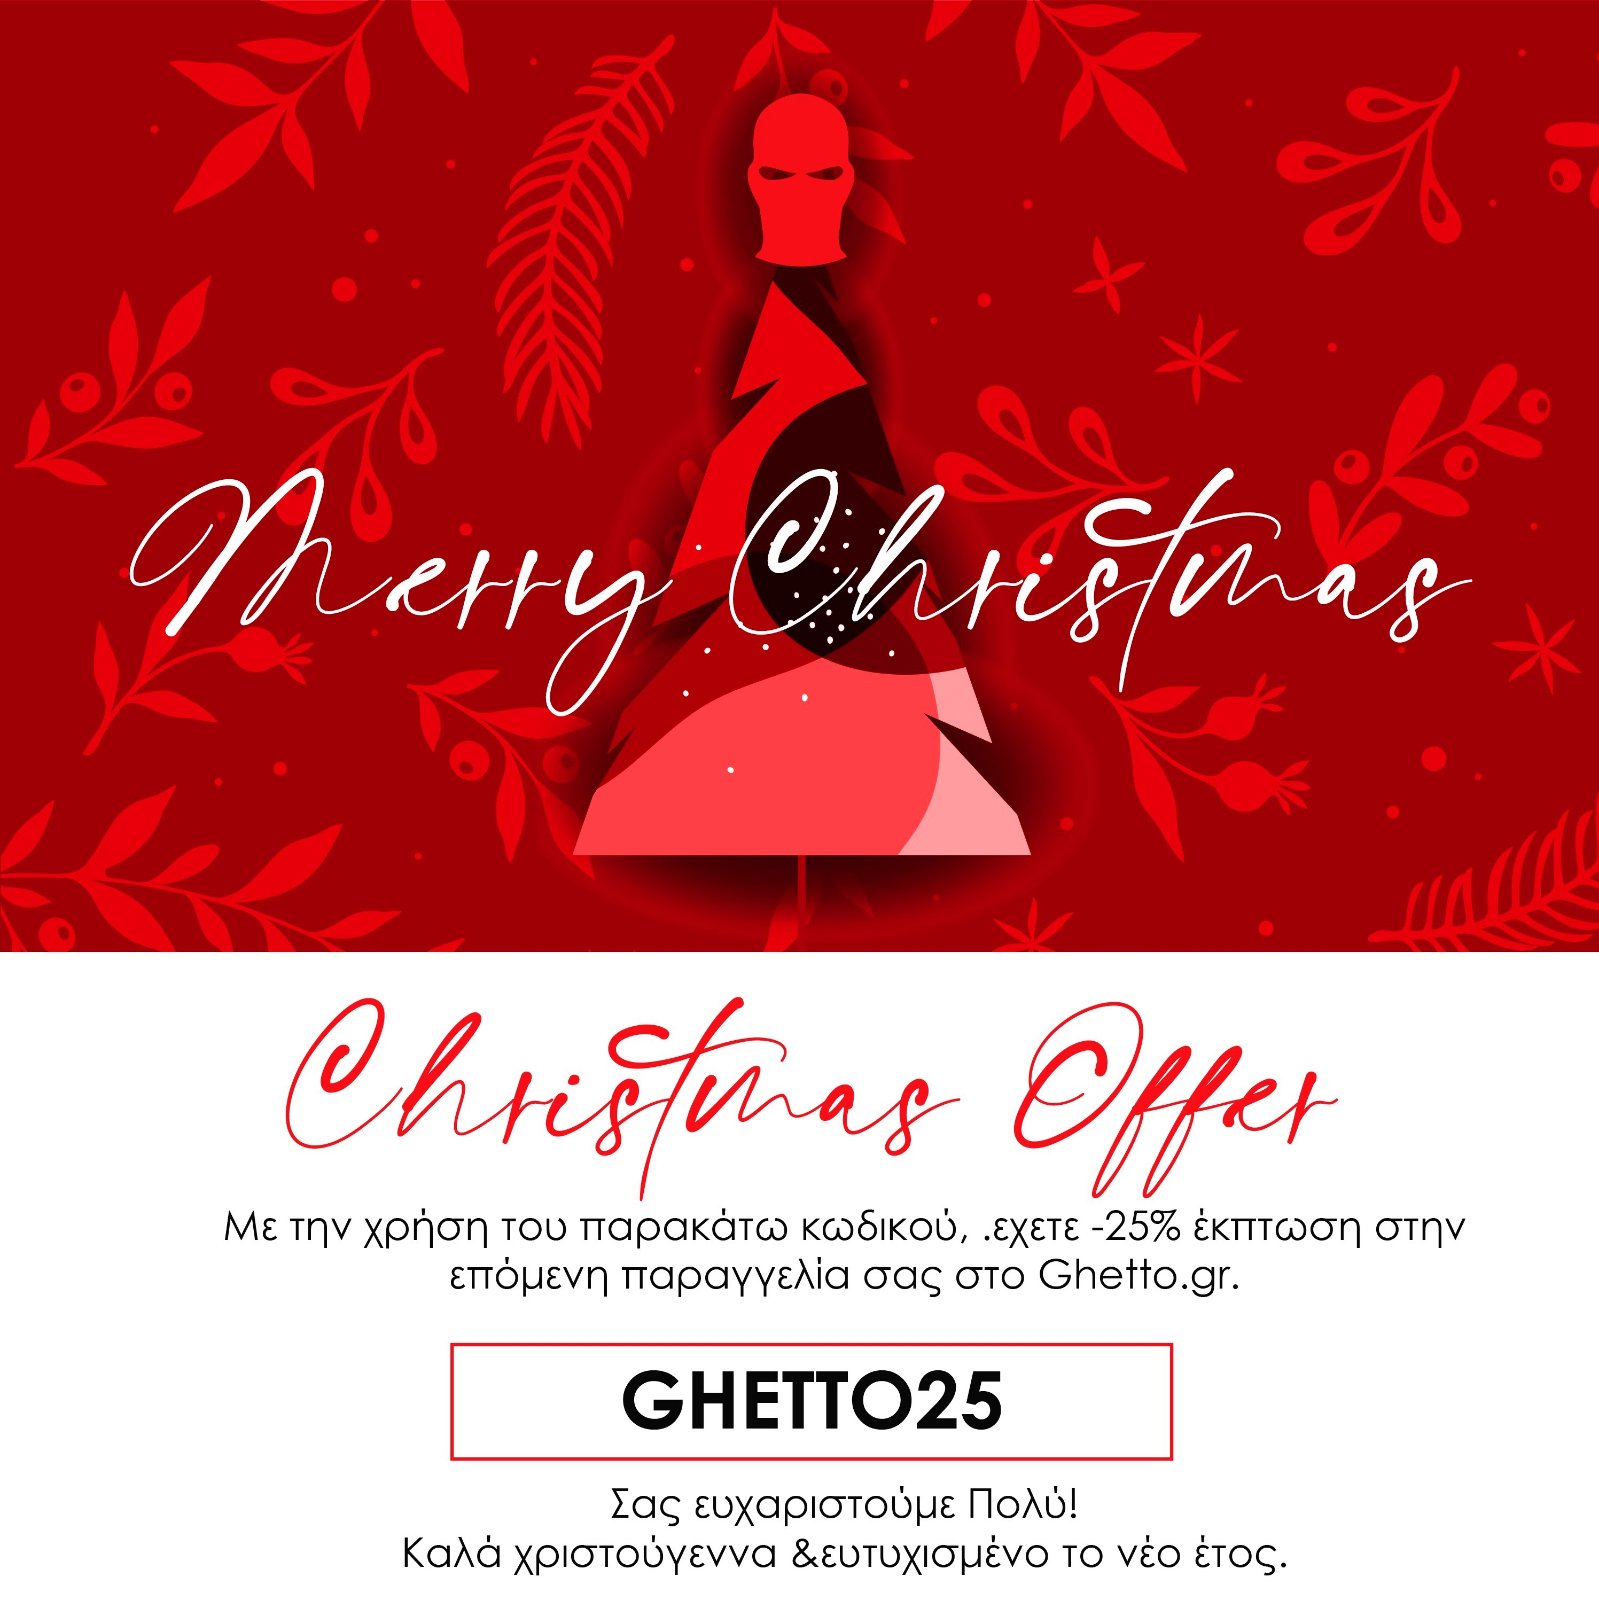 You are currently viewing Ghetto Christmas Offer -25% Out Now! Offer Code: GHETTO25